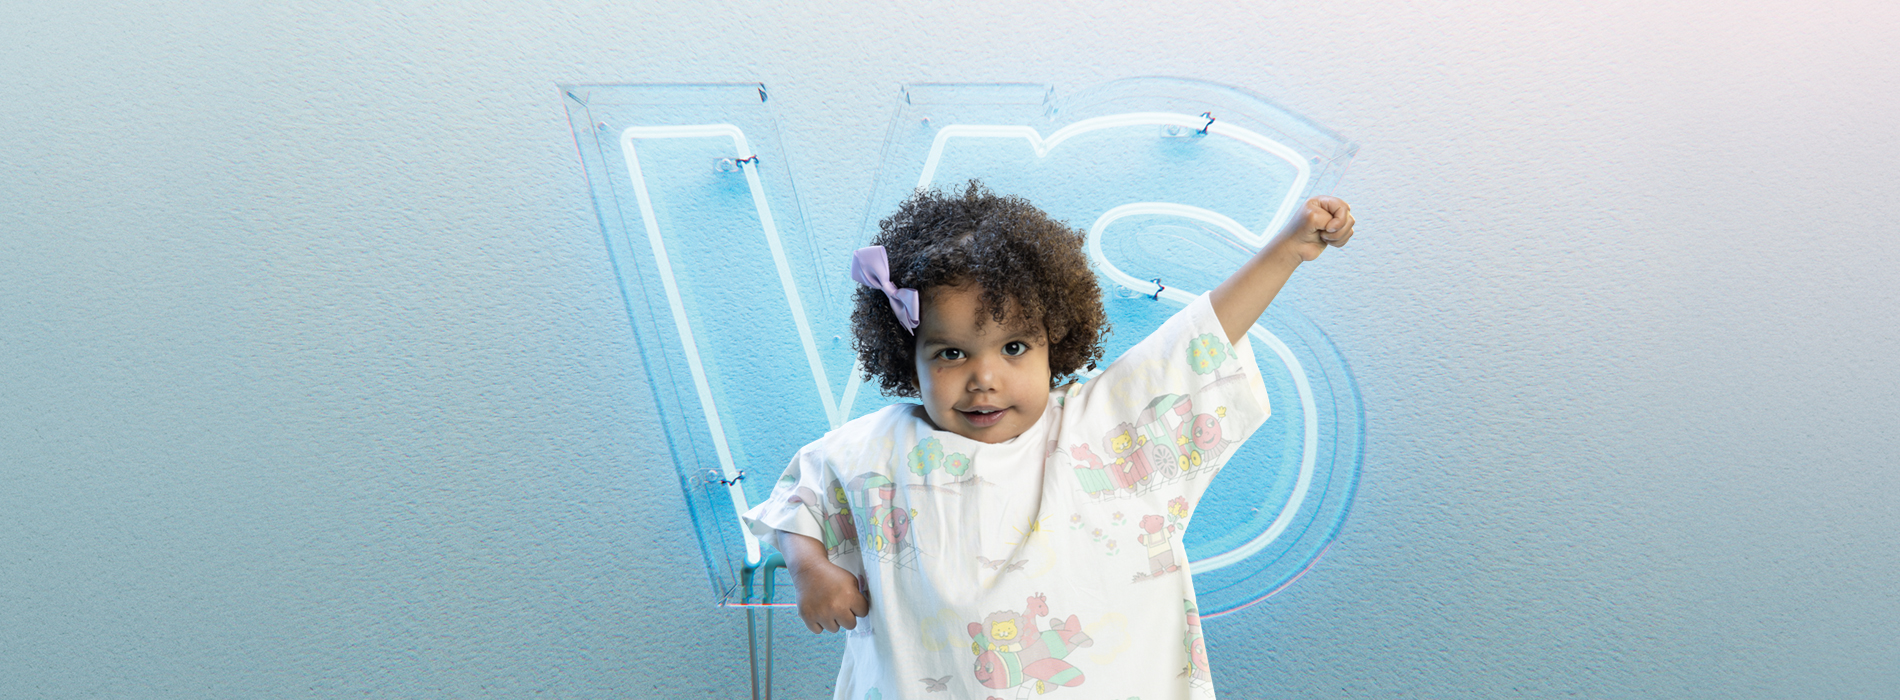 Young child wearing a hospital gown. She has one arm raised, standing in front of a neon sign with the letters VS.